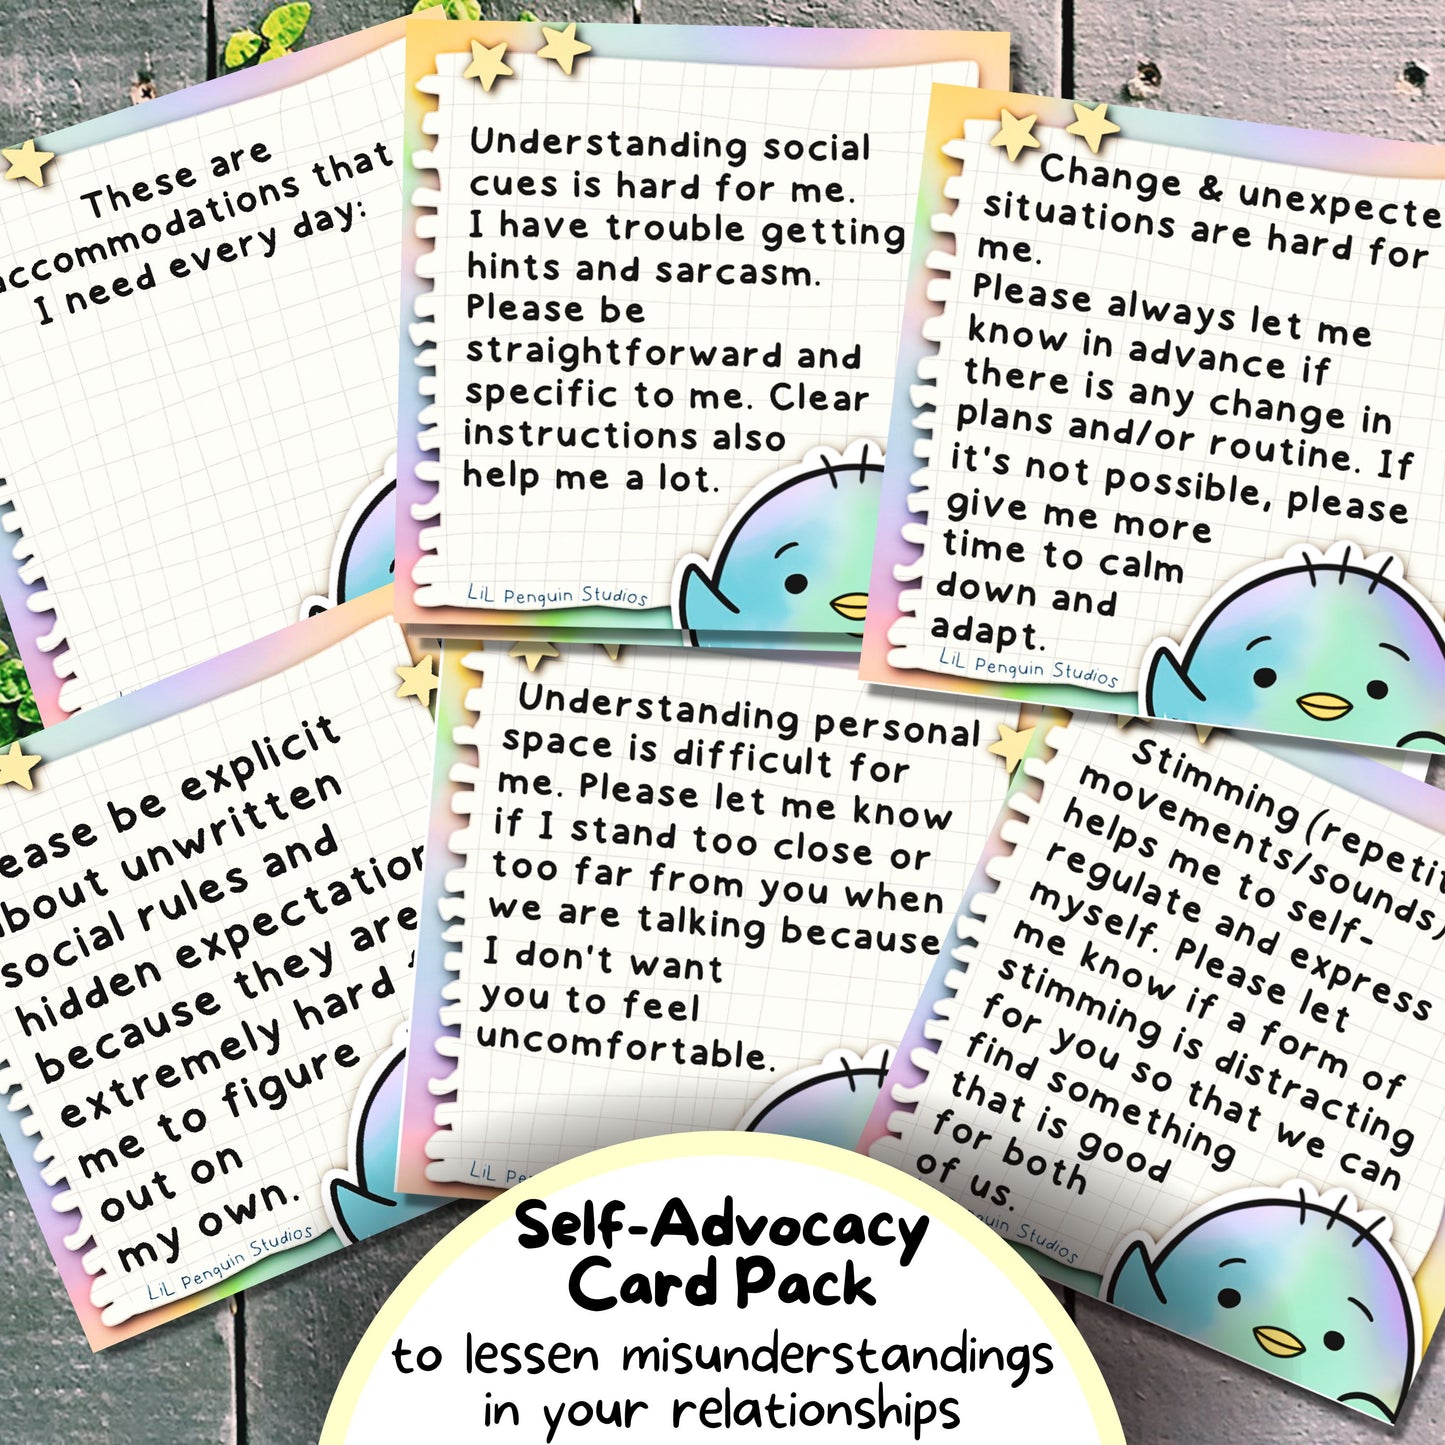 Communication Cards with Explanations to lessen misuderstandings in your relationships - Autism Self-Advocacy Card Pack (School, Work, Friends, Family) written and hand-drawn by an autistic artist (LiL Penguin Studios( 